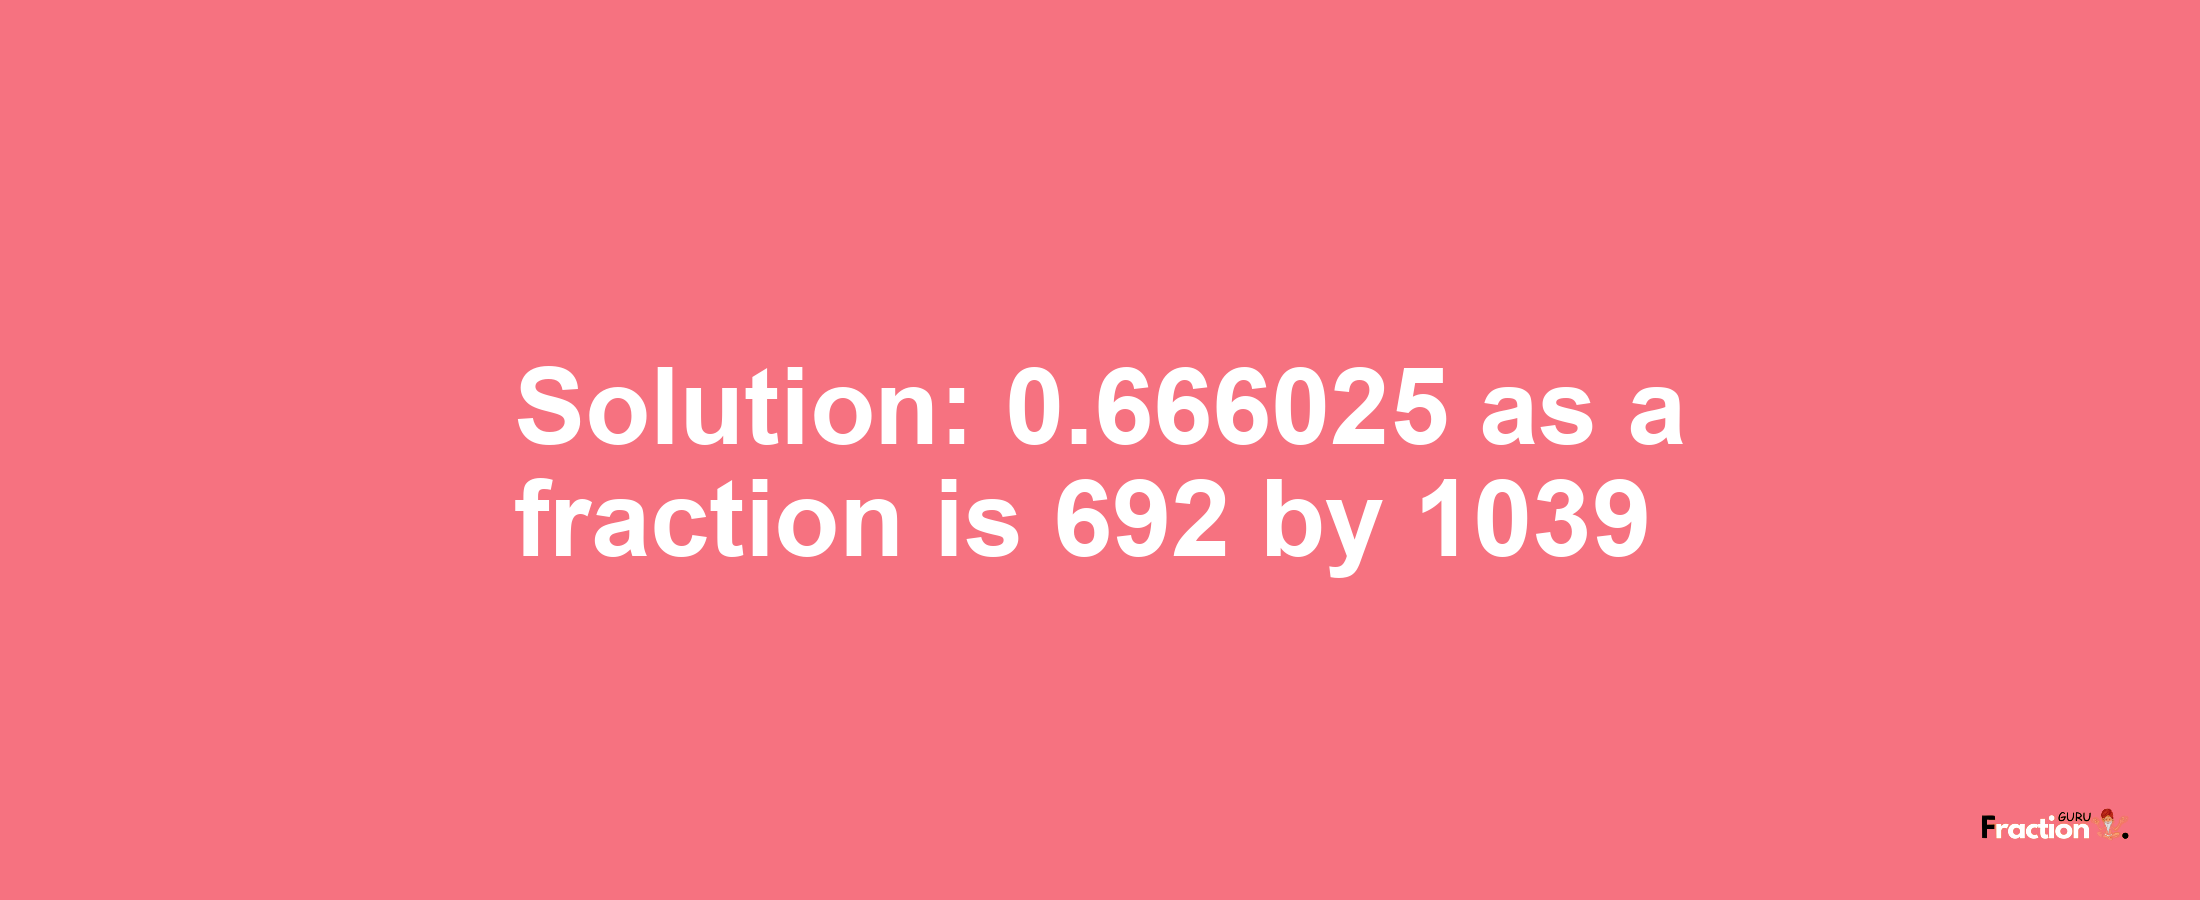 Solution:0.666025 as a fraction is 692/1039